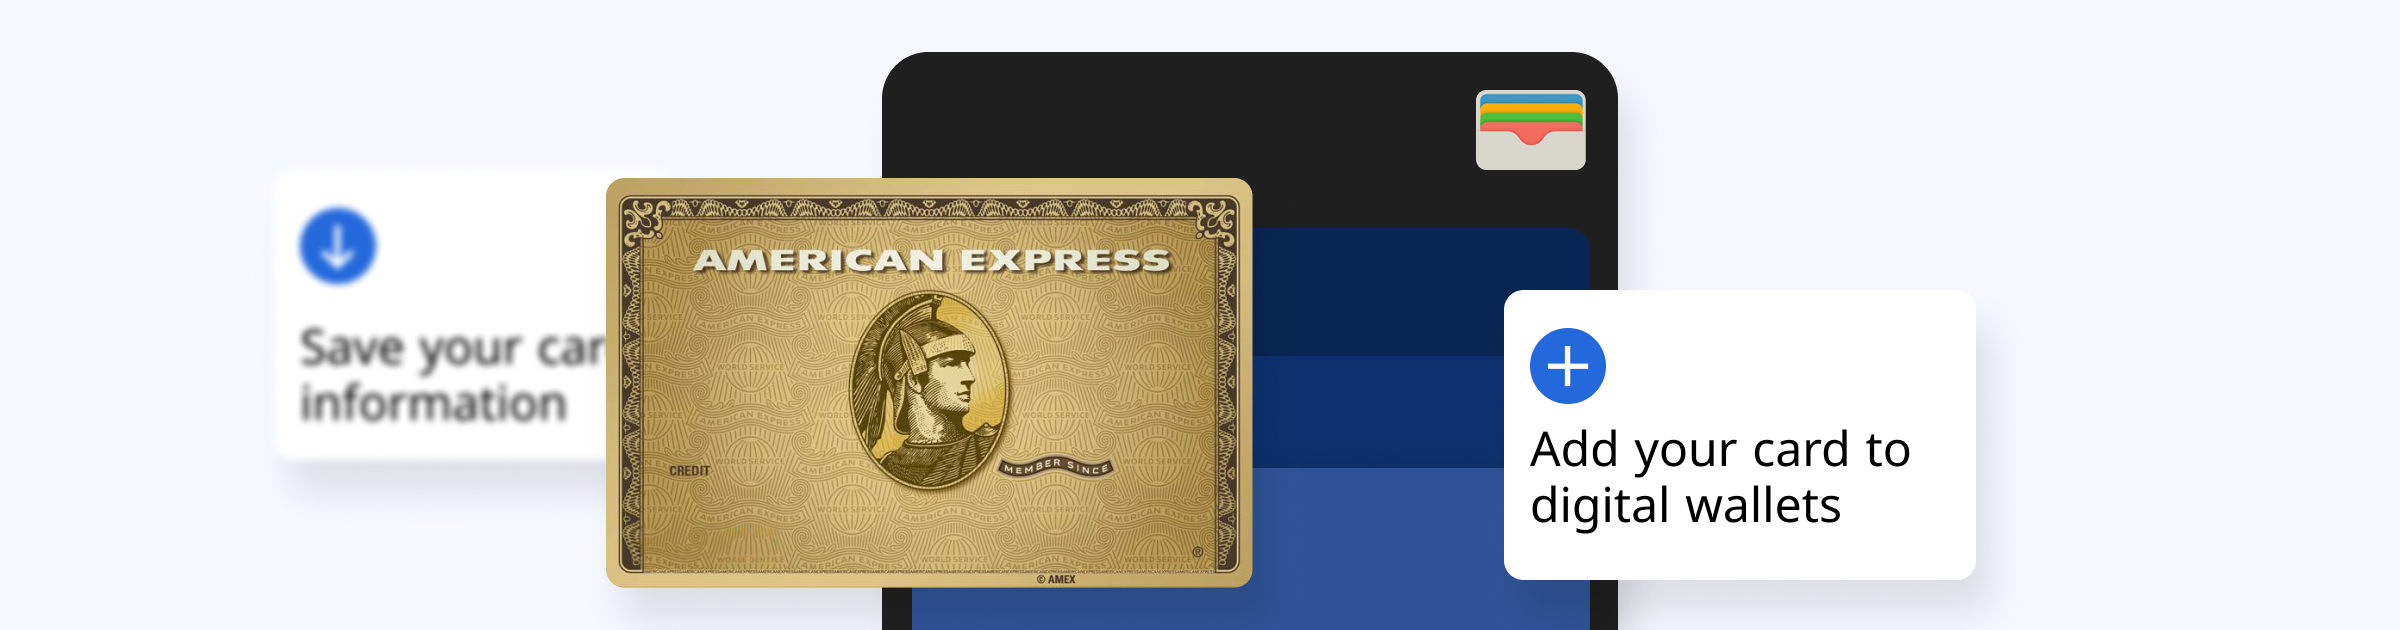 American express card collage.